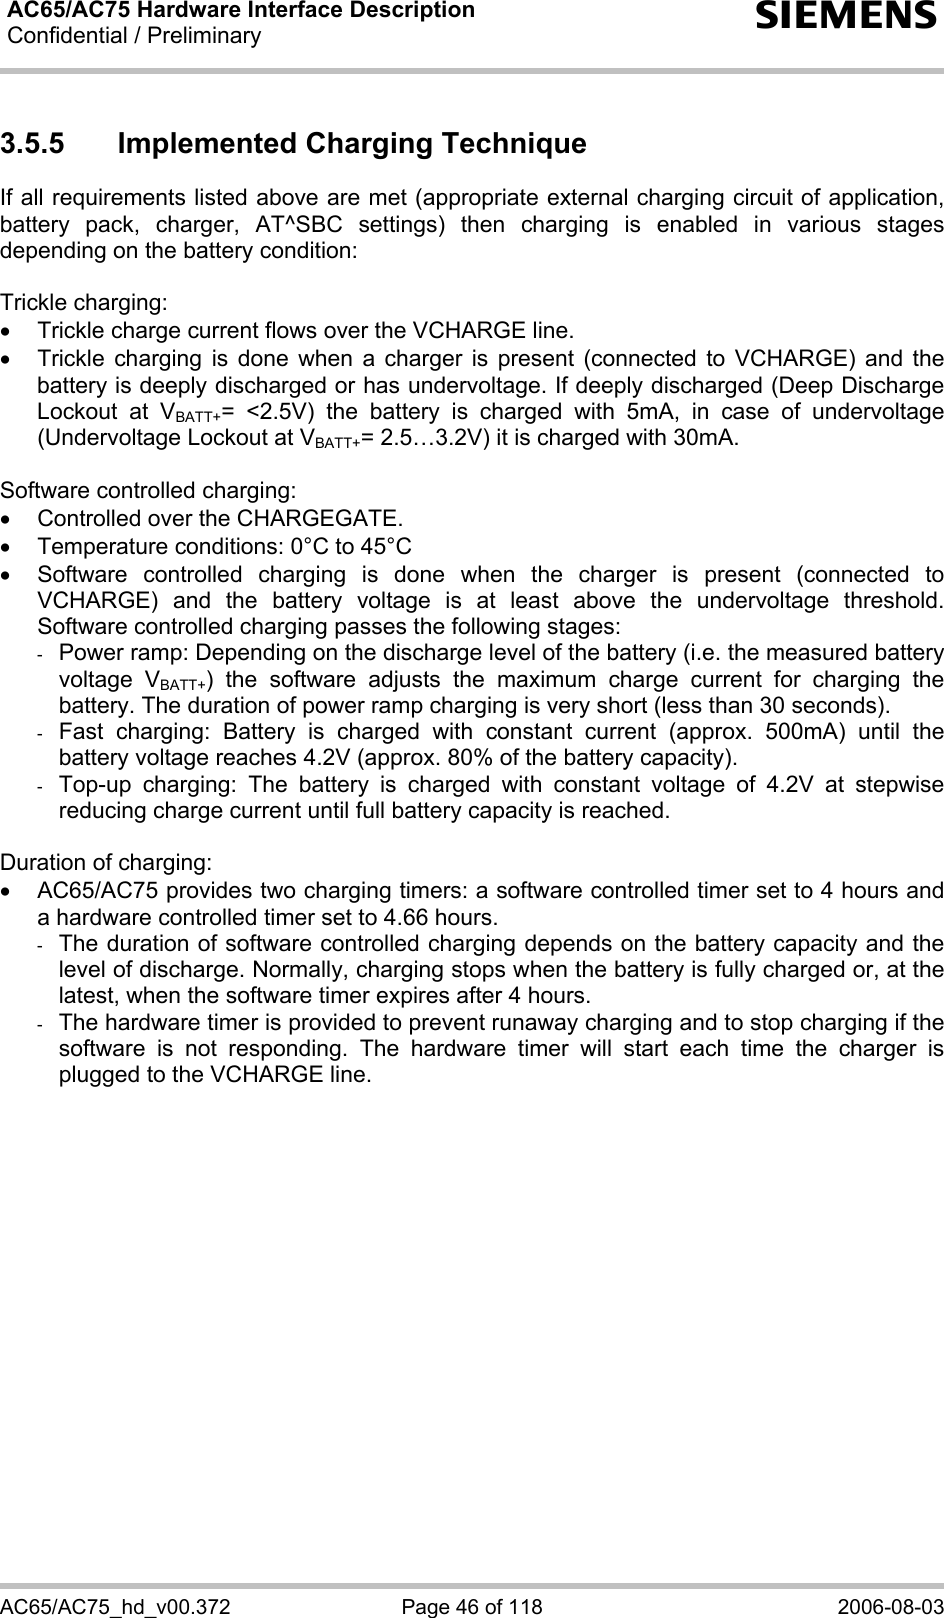 AC65/AC75 Hardware Interface Description Confidential / Preliminary  s AC65/AC75_hd_v00.372  Page 46 of 118  2006-08-03 3.5.5  Implemented Charging Technique If all requirements listed above are met (appropriate external charging circuit of application, battery pack, charger, AT^SBC settings) then charging is enabled in various stages depending on the battery condition:  Trickle charging: •  Trickle charge current flows over the VCHARGE line. •  Trickle charging is done when a charger is present (connected to VCHARGE) and the battery is deeply discharged or has undervoltage. If deeply discharged (Deep Discharge Lockout at VBATT+= &lt;2.5V) the battery is charged with 5mA, in case of undervoltage (Undervoltage Lockout at VBATT+= 2.5…3.2V) it is charged with 30mA.  Software controlled charging: •  Controlled over the CHARGEGATE. •  Temperature conditions: 0°C to 45°C •  Software controlled charging is done when the charger is present (connected to VCHARGE) and the battery voltage is at least above the undervoltage threshold. Software controlled charging passes the following stages: -  Power ramp: Depending on the discharge level of the battery (i.e. the measured battery voltage VBATT+) the software adjusts the maximum charge current for charging the battery. The duration of power ramp charging is very short (less than 30 seconds). -  Fast charging: Battery is charged with constant current (approx. 500mA) until the battery voltage reaches 4.2V (approx. 80% of the battery capacity).  -  Top-up charging: The battery is charged with constant voltage of 4.2V at stepwise reducing charge current until full battery capacity is reached.   Duration of charging: •  AC65/AC75 provides two charging timers: a software controlled timer set to 4 hours and a hardware controlled timer set to 4.66 hours. -  The duration of software controlled charging depends on the battery capacity and the level of discharge. Normally, charging stops when the battery is fully charged or, at the latest, when the software timer expires after 4 hours. -  The hardware timer is provided to prevent runaway charging and to stop charging if the software is not responding. The hardware timer will start each time the charger is plugged to the VCHARGE line.  